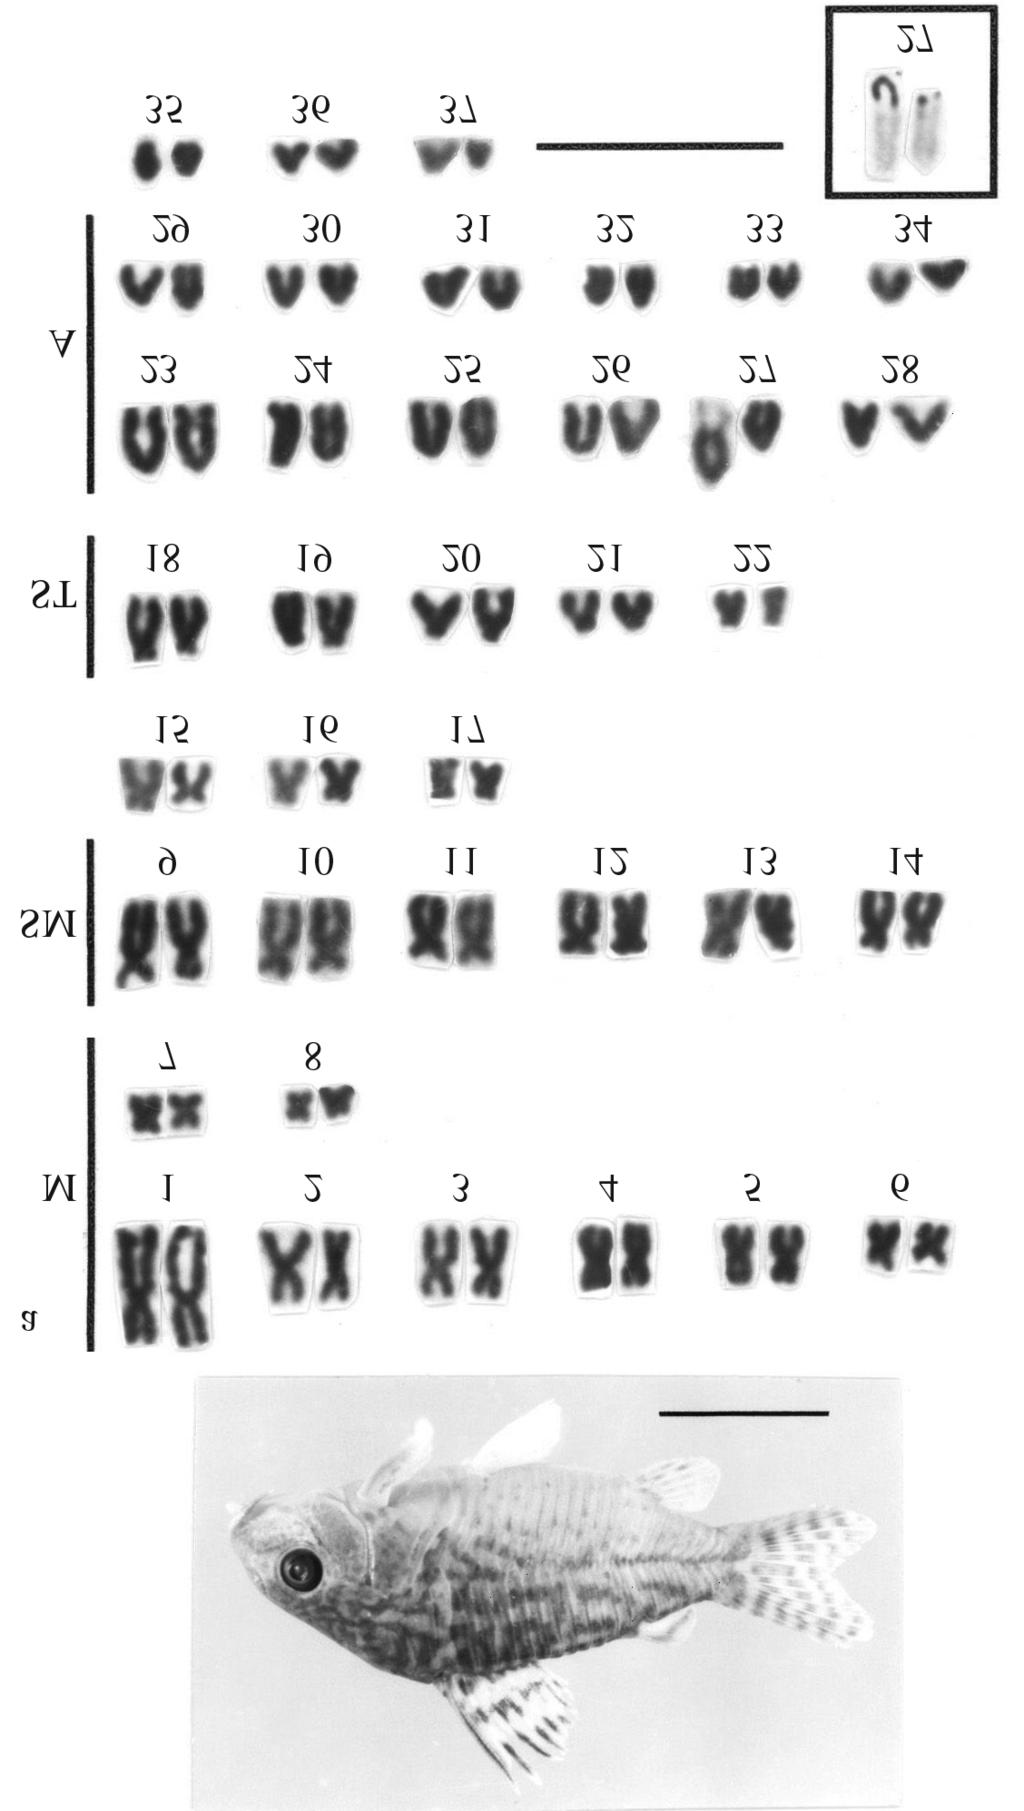 Although the cytogenetic studies in the genus Aspidoras have been conducted in about one fifth of the described species, it is possible to observe the remarkable homogeneity in the karyotypes of the